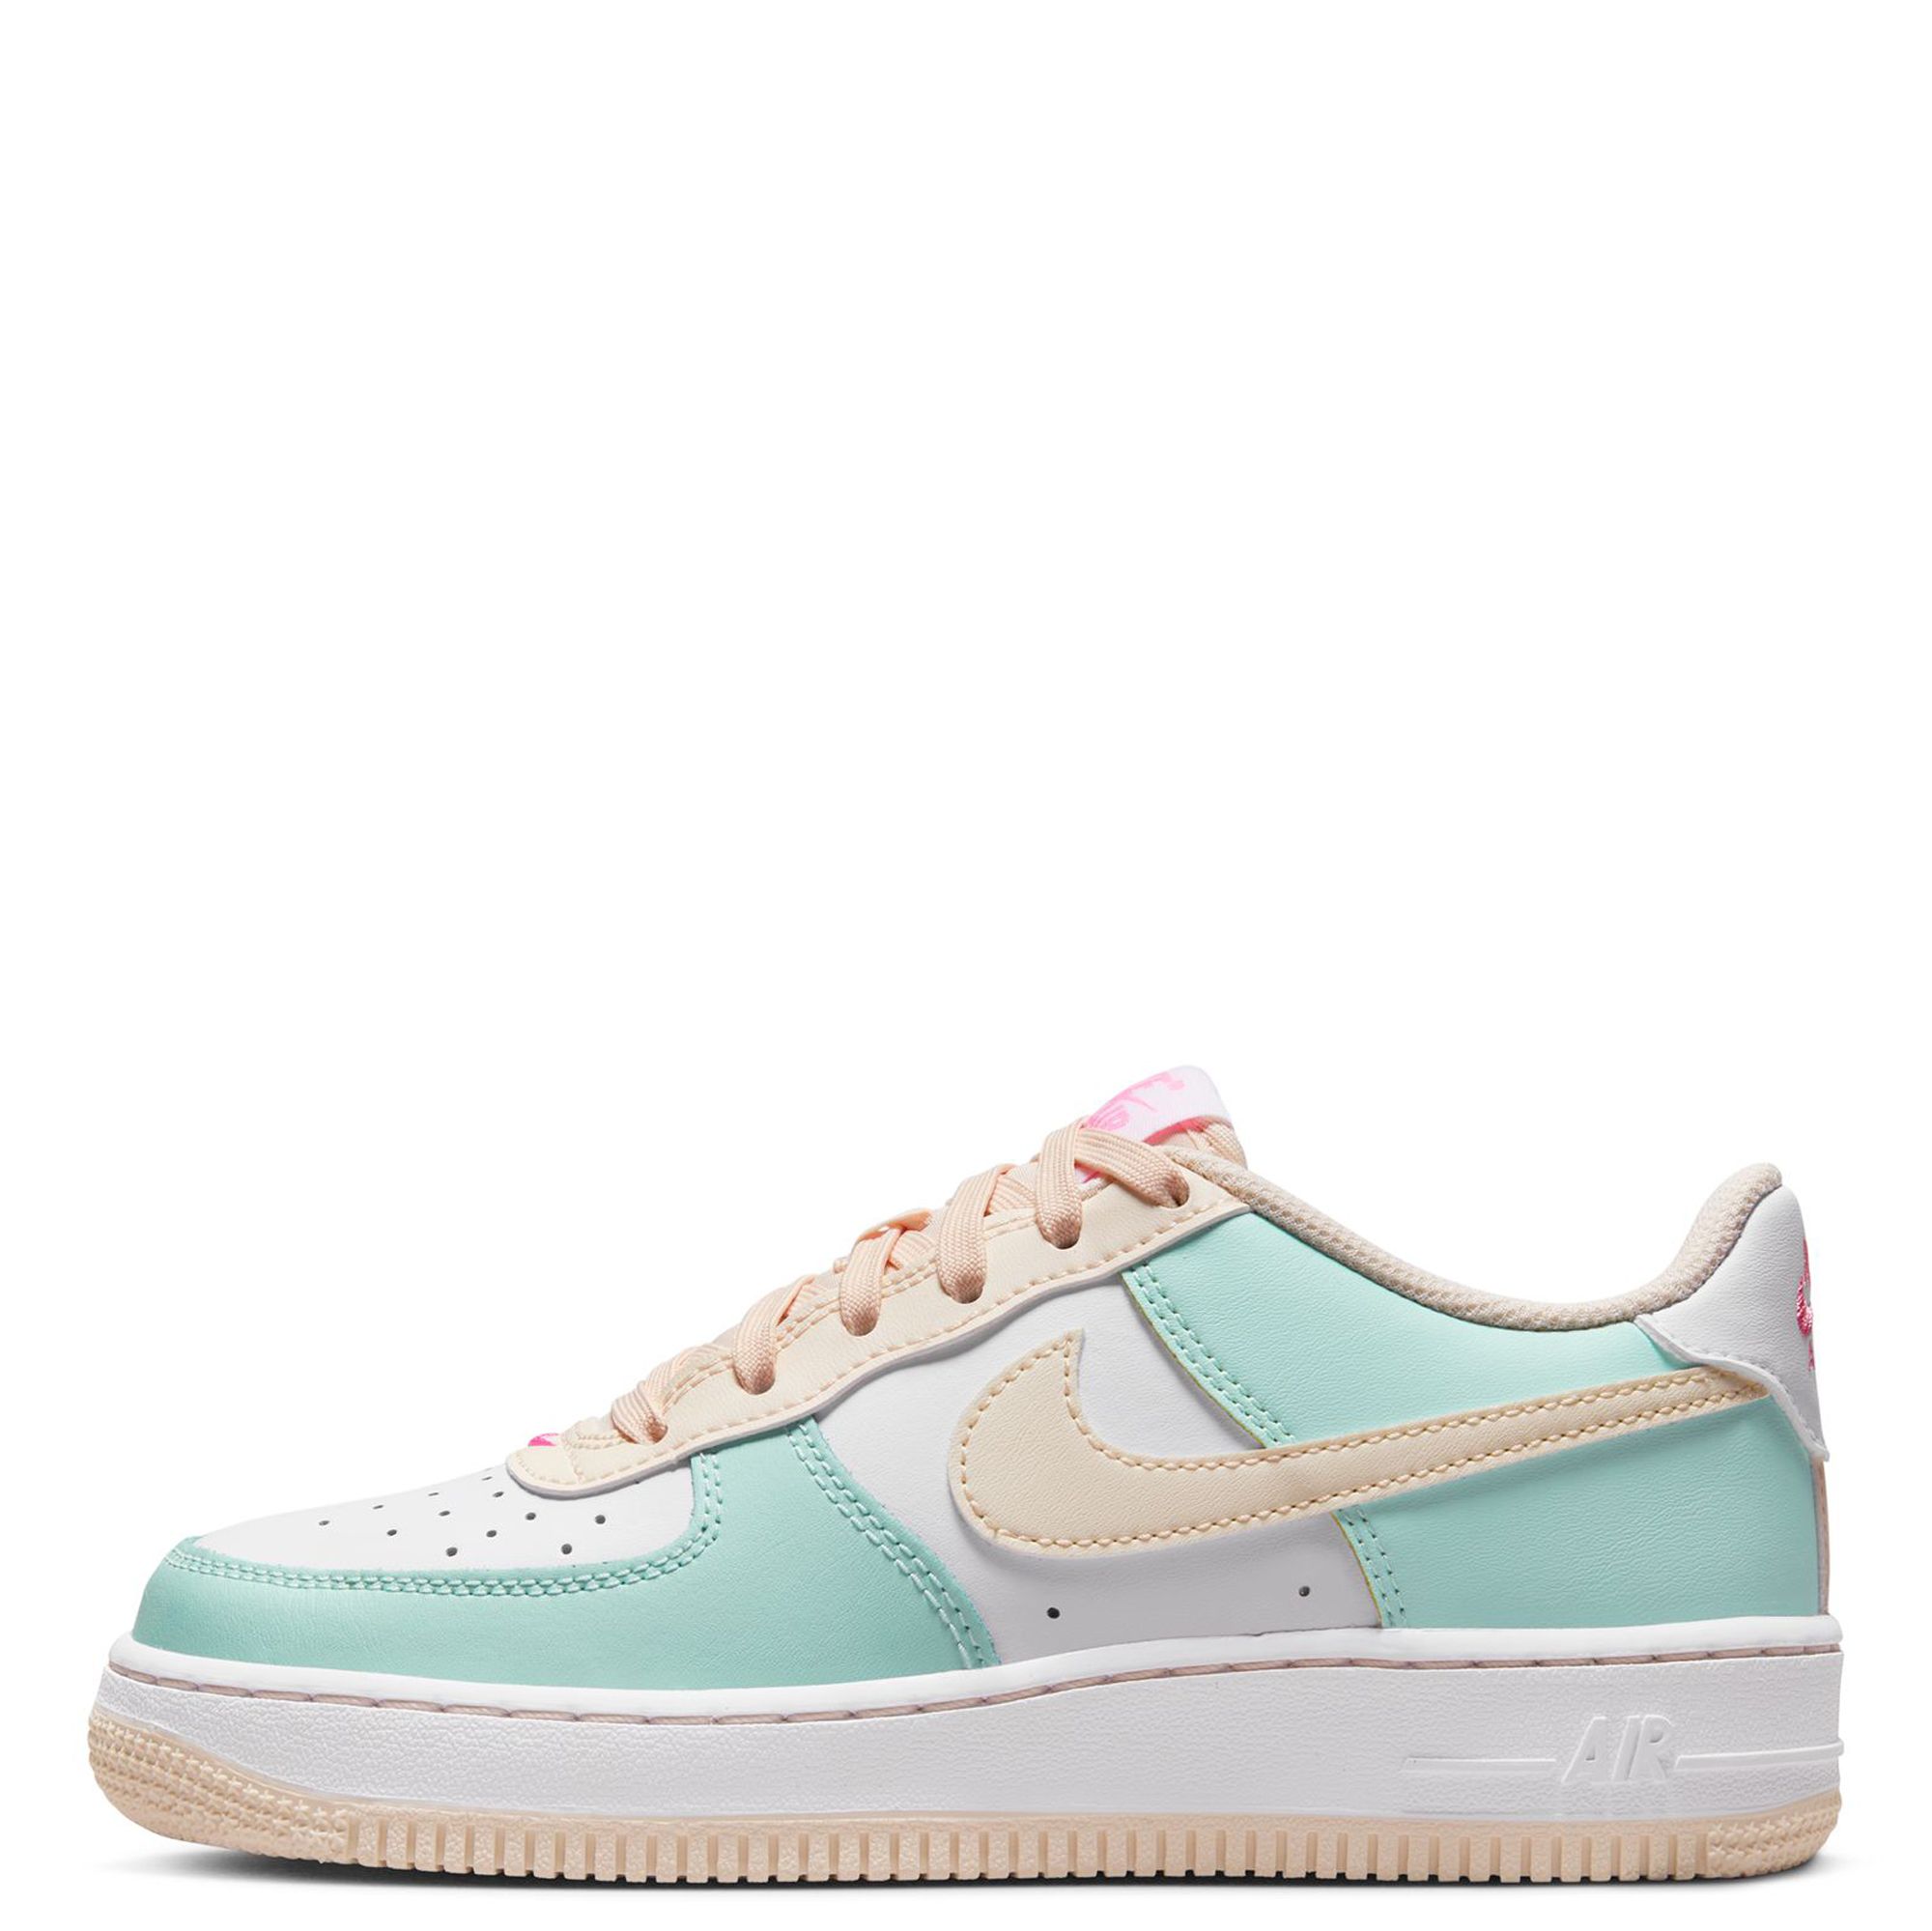 Nike Air Force 1 Low Grade School Basketball Shoes